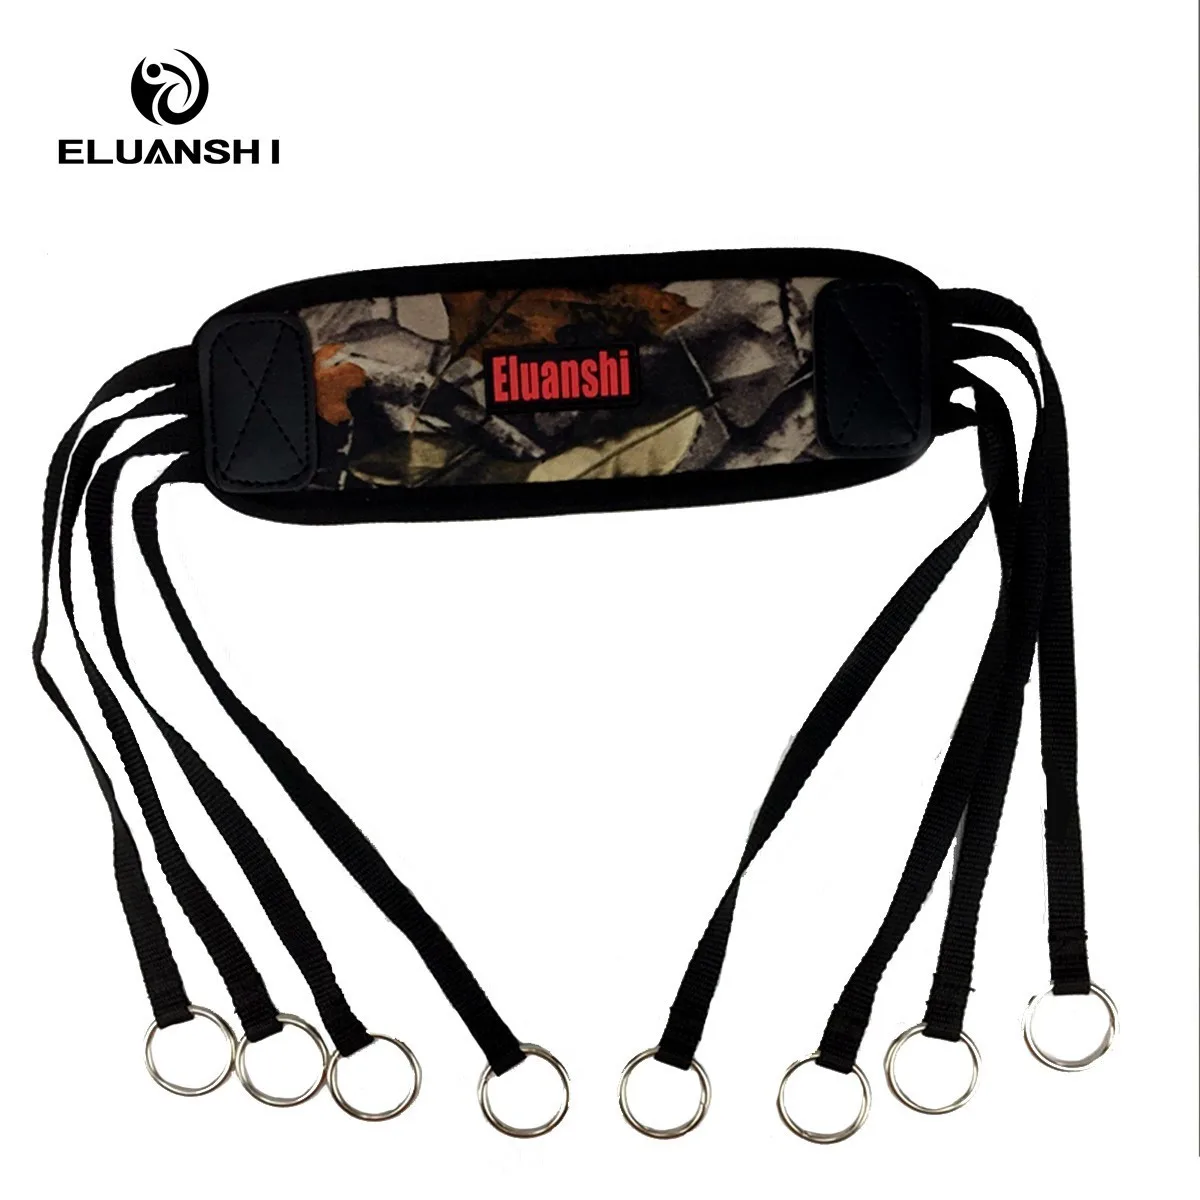 ELUANSHI Outdoor Camouflage Hunting Bags Pouches Bird Duck Strap Hanger Game Carrier Belt Holder Brown Color Accessories Genuine